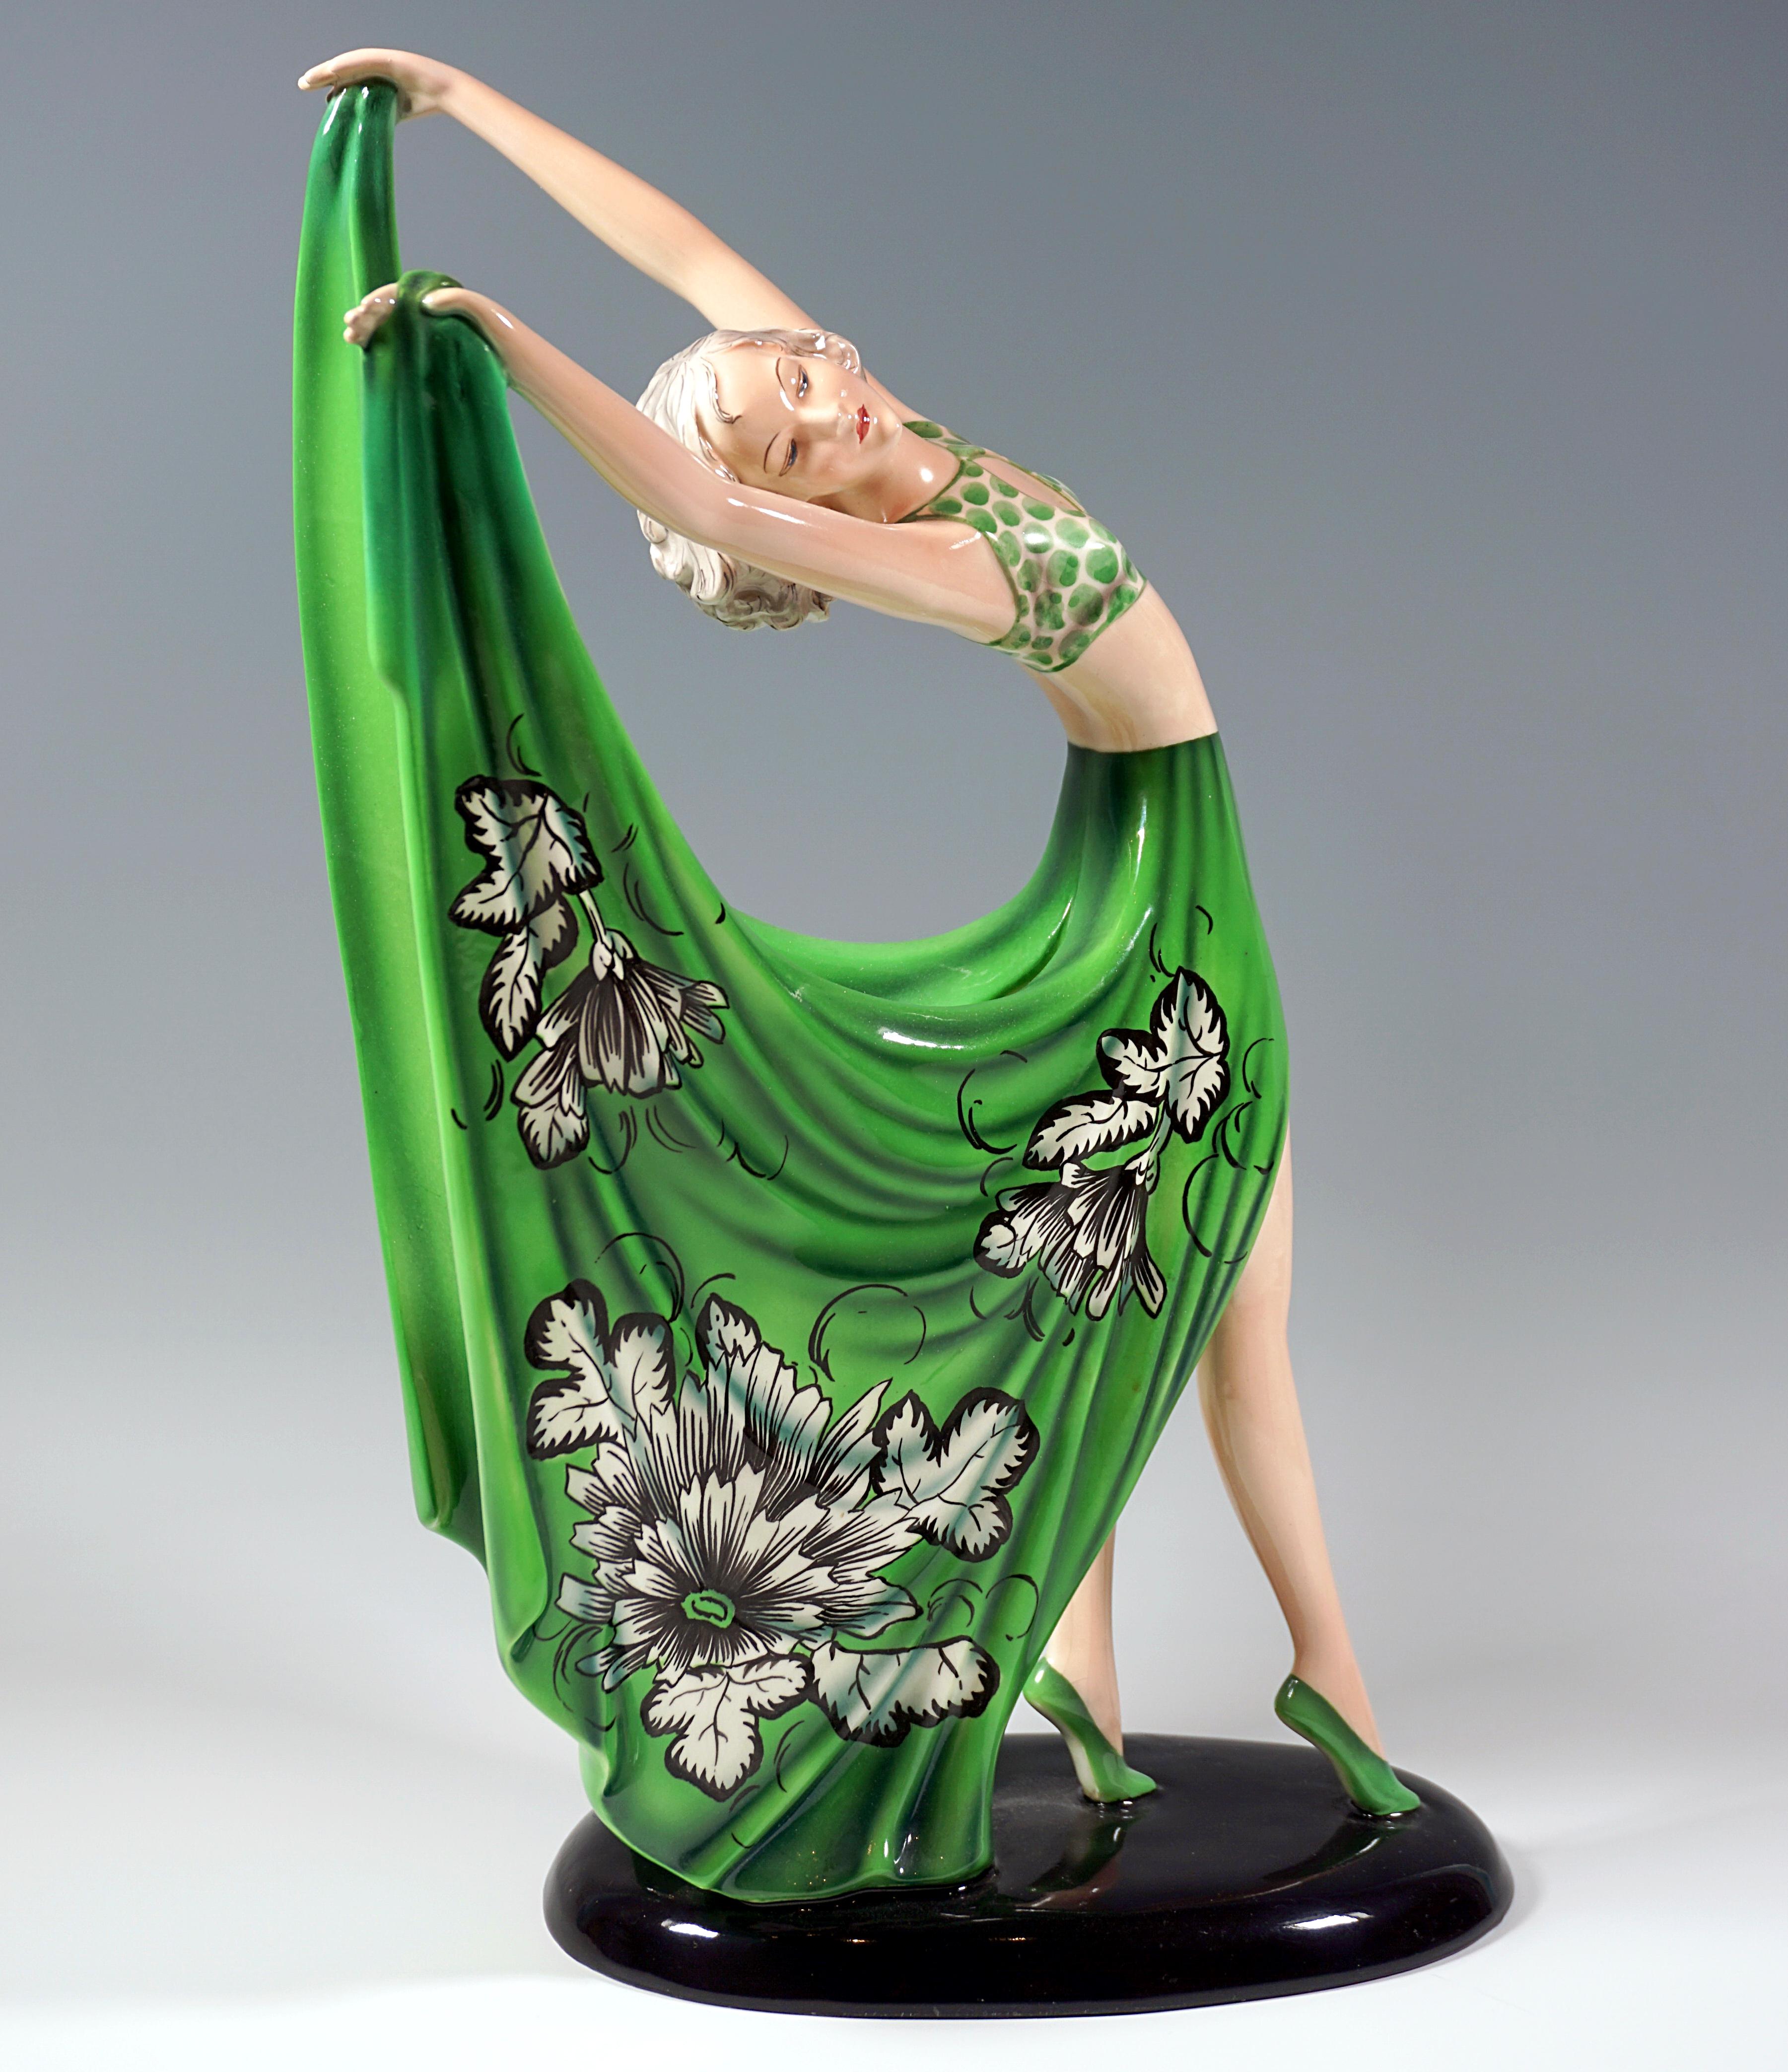 Delicate Goldscheider Art Déco Ceramic Figurine.
Gracefully posing dancer in a green costume: dotted bustier skirt short at the front with long, wide side parts that are slit on the back and decorated with white and black flowers, holding them up